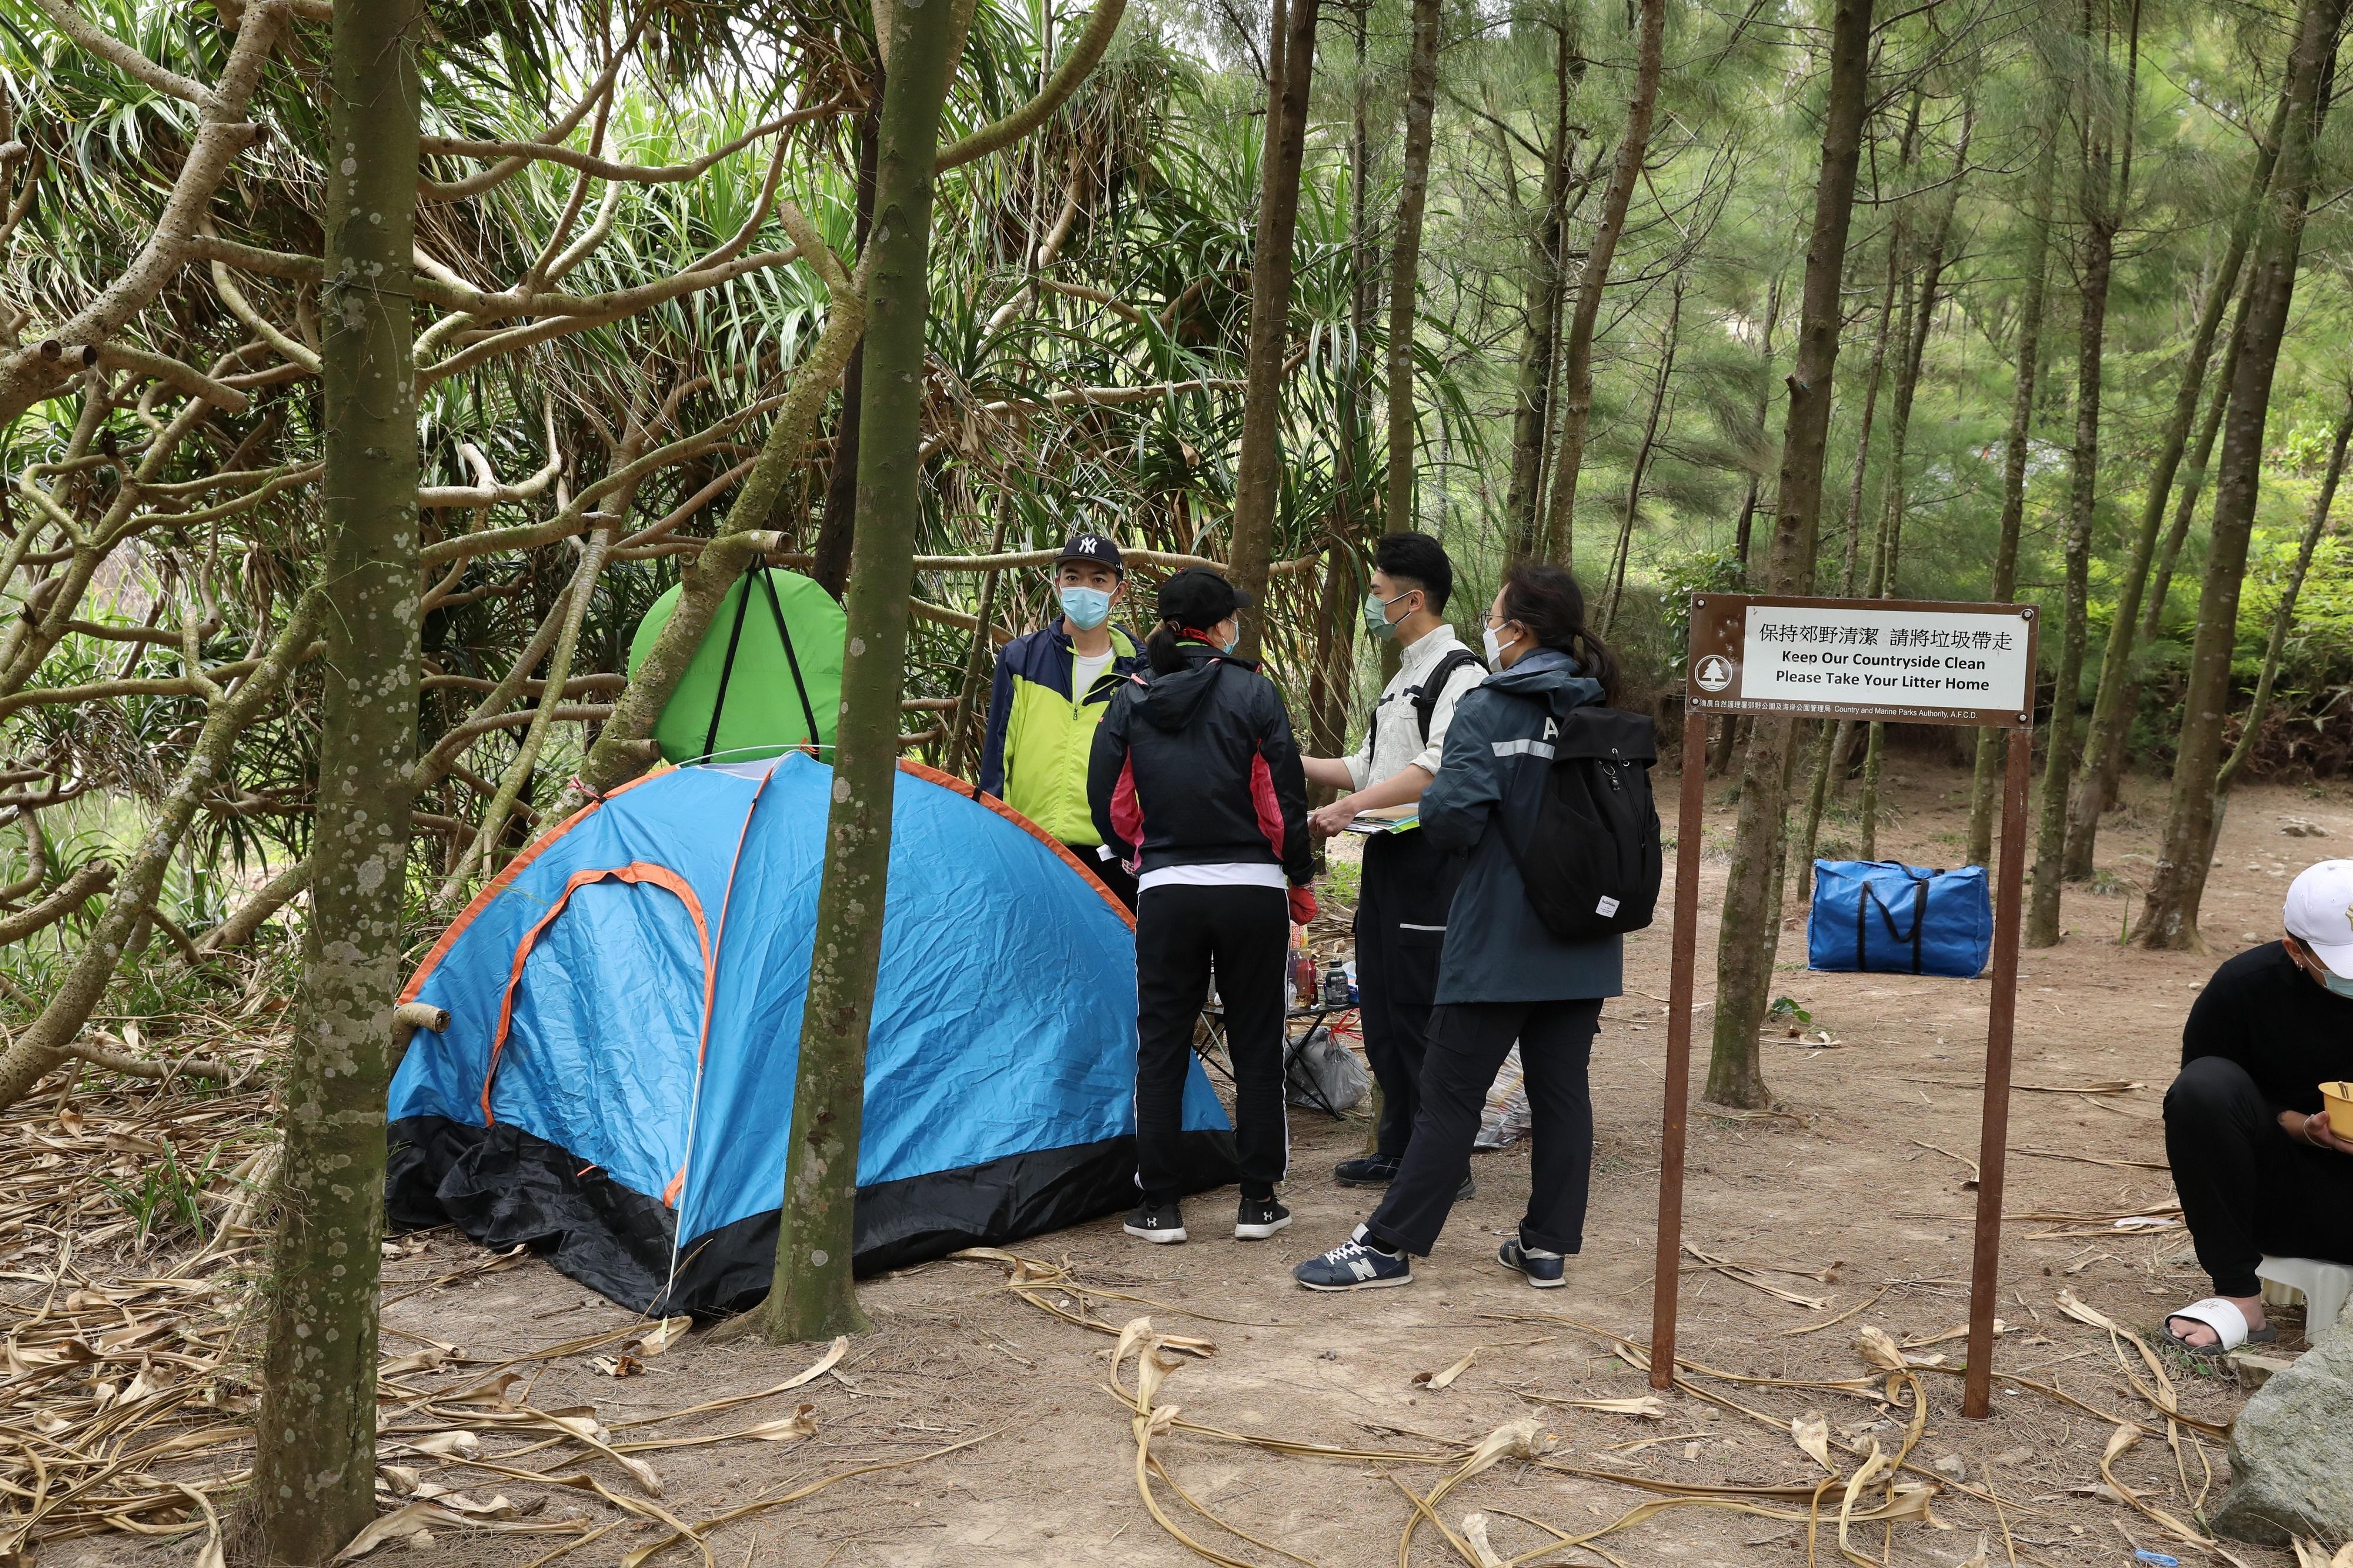 The Agriculture, Fisheries and Conservation Department stepped up inspection and enforcement in combatting breaches of anti-epidemic regulations in crowded places in various country parks, and joined hands with the Police in joint enforcement operations in Sai Kung Country Park, Plover Cove (Extension) Country Park, Pat Sin Leng Country Park and Tung Lung Fort Special Area yesterday and today (April 15 and 16).